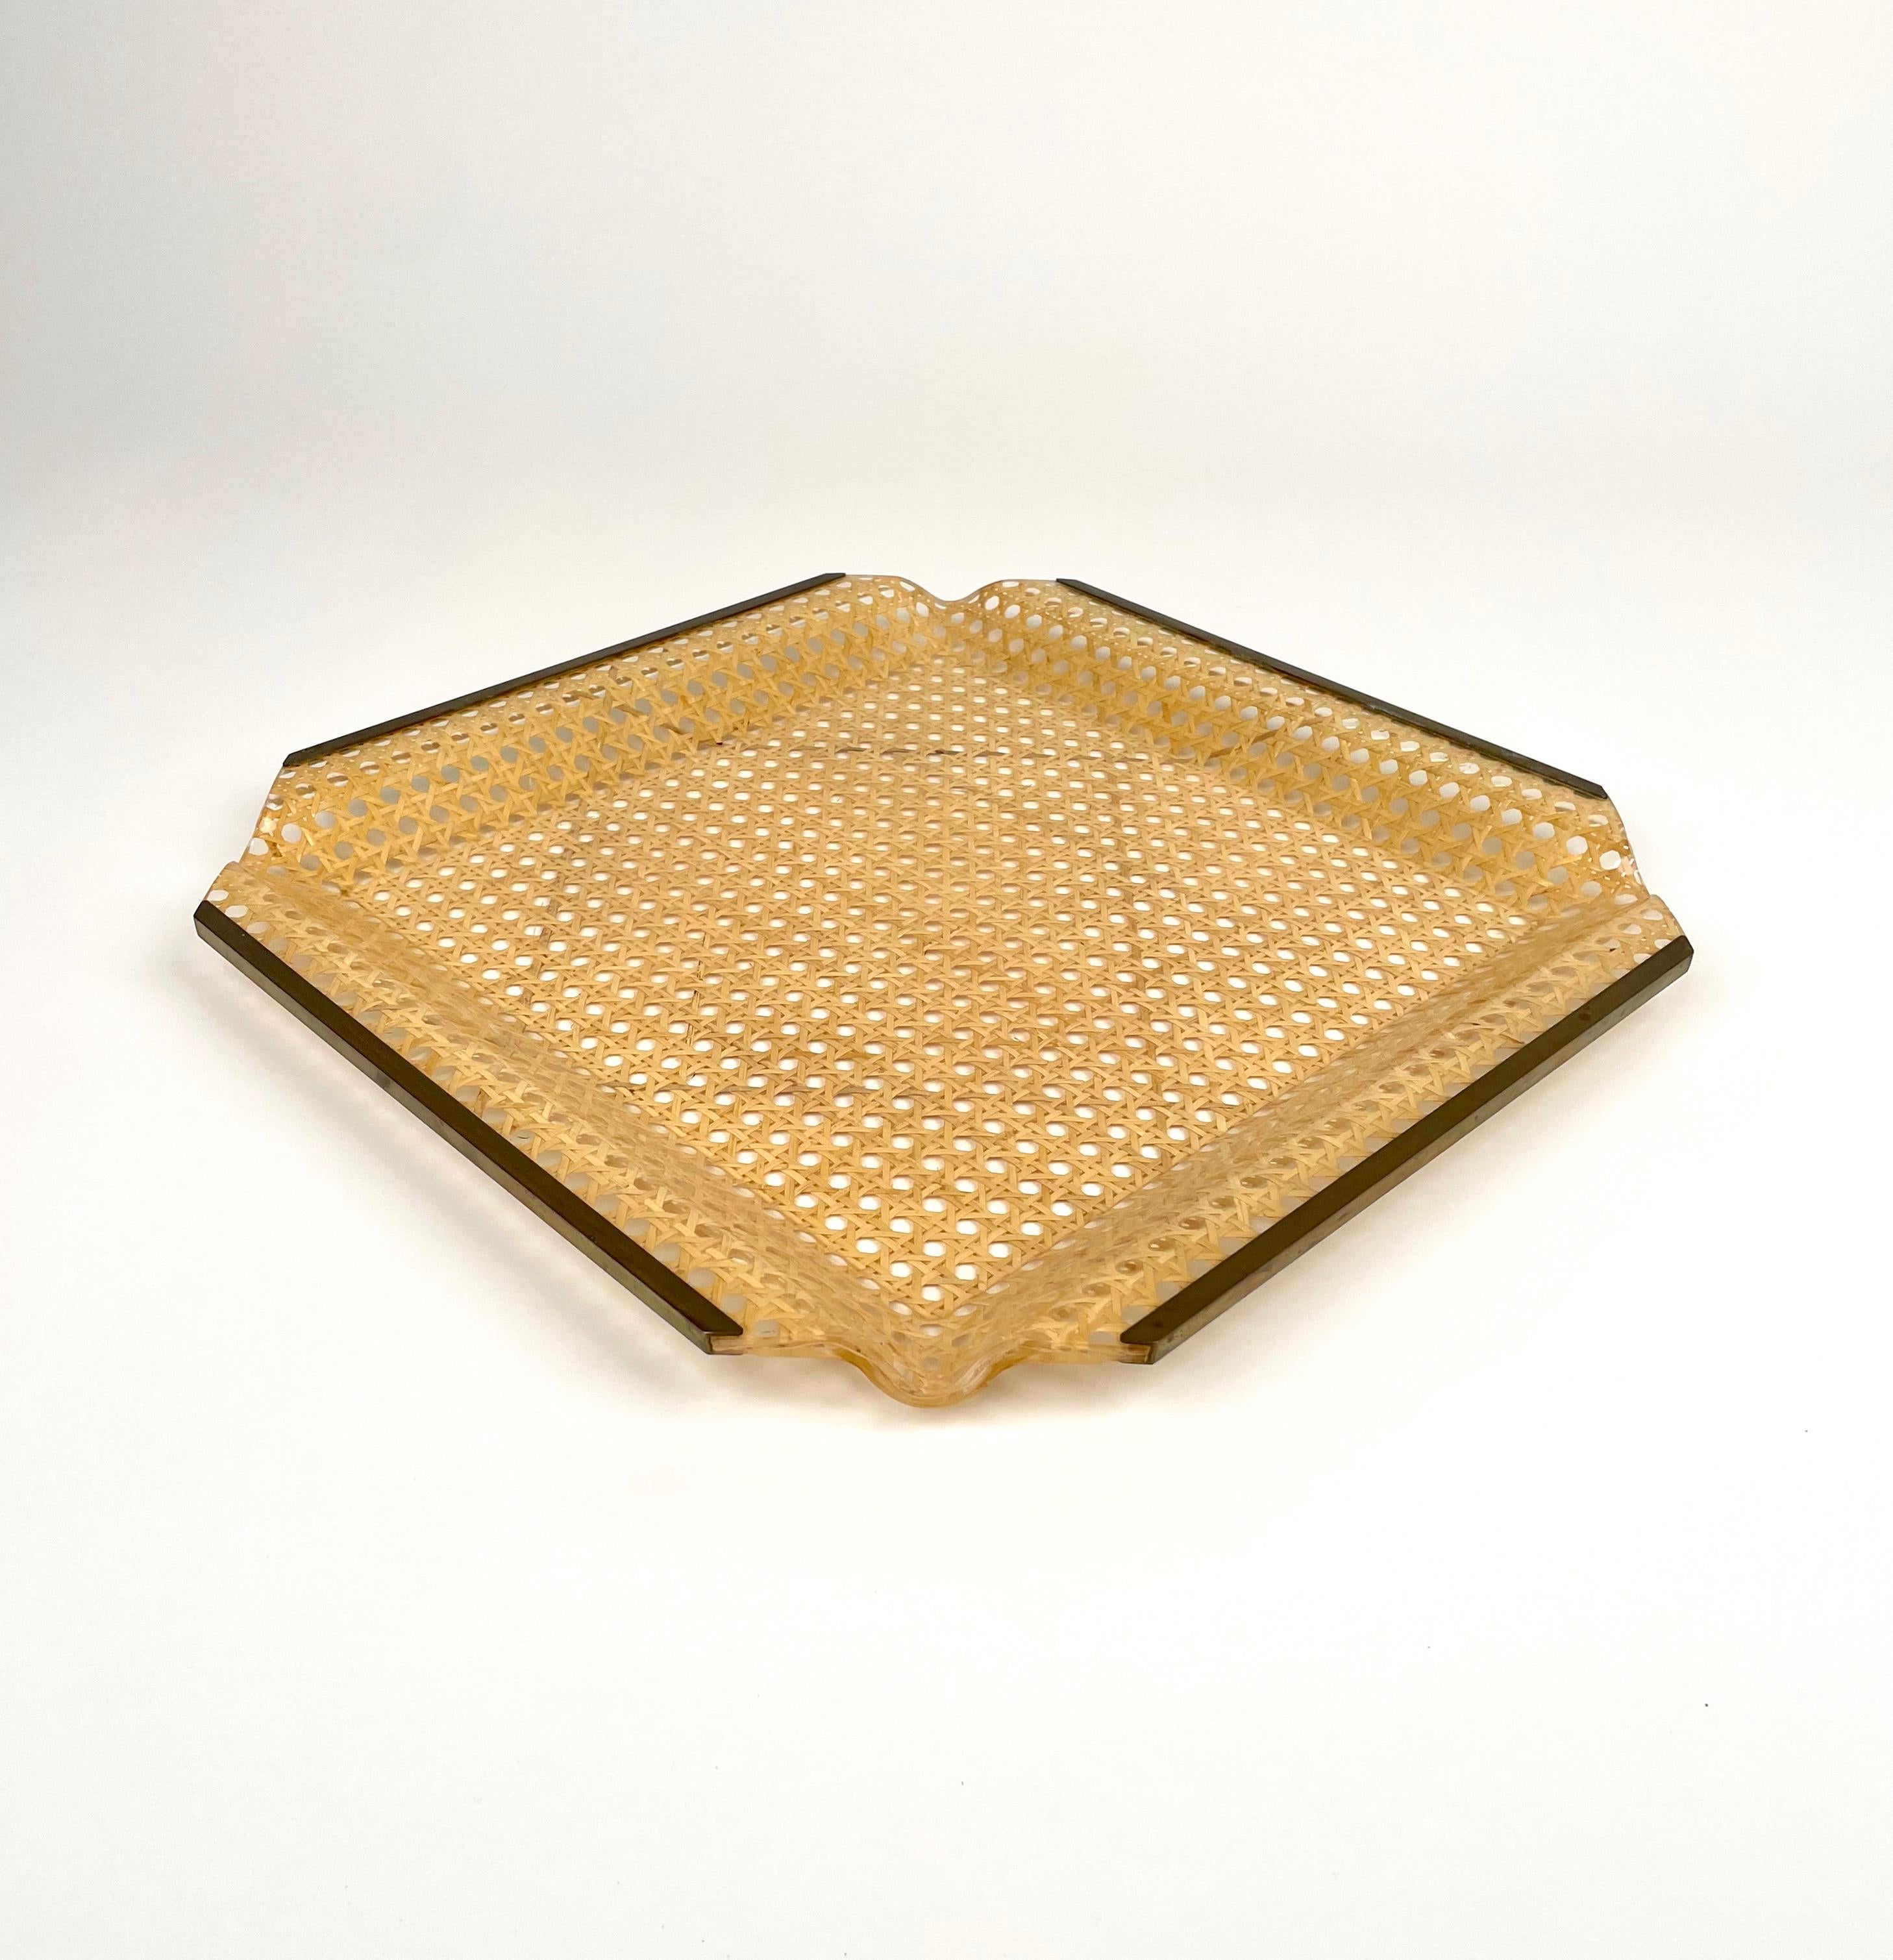 Squared serving tray or centerpiece in lucite, brass and rattan in the style of Christian Dior Home.

Made in Italy in the 1970s.

The brass structure, if you request it and at no additional cost, can be polished.